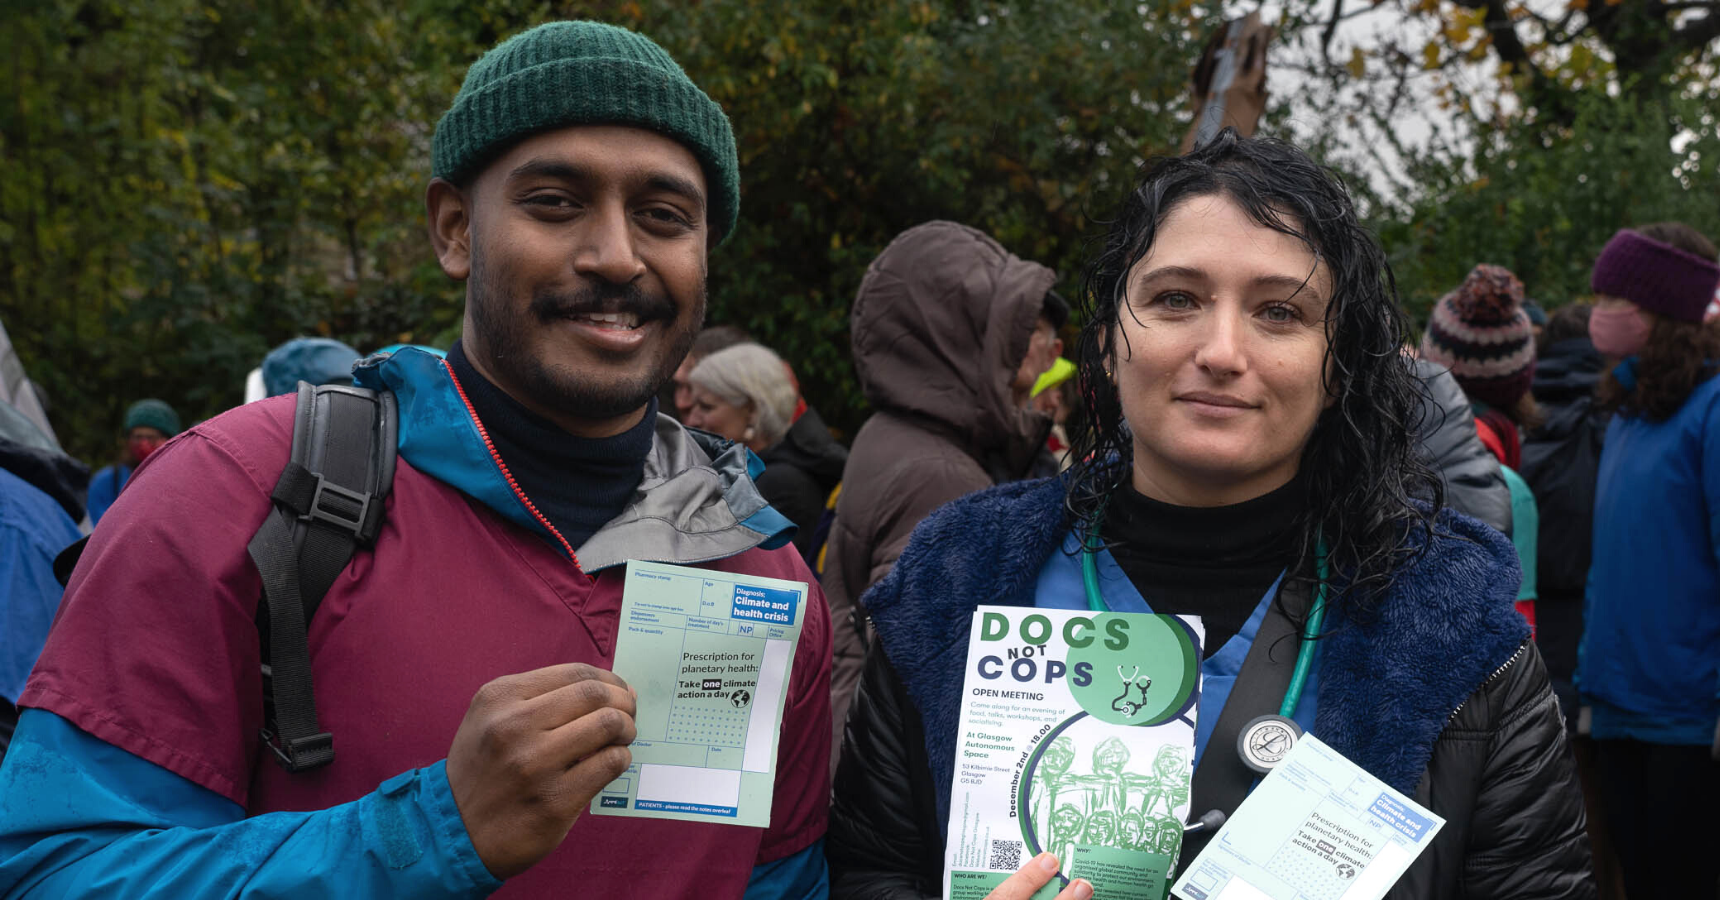 Two people wearing scrubs at a protest holding up pamphlets. The person on the left has brown skin and a green beanie hat, holding a 'prescription for planetary health' pamphlet that looks like a prescription slip. The person on the right holds a 'Docs Not Cops' flyer. They are outside surrounded by people and greenery.